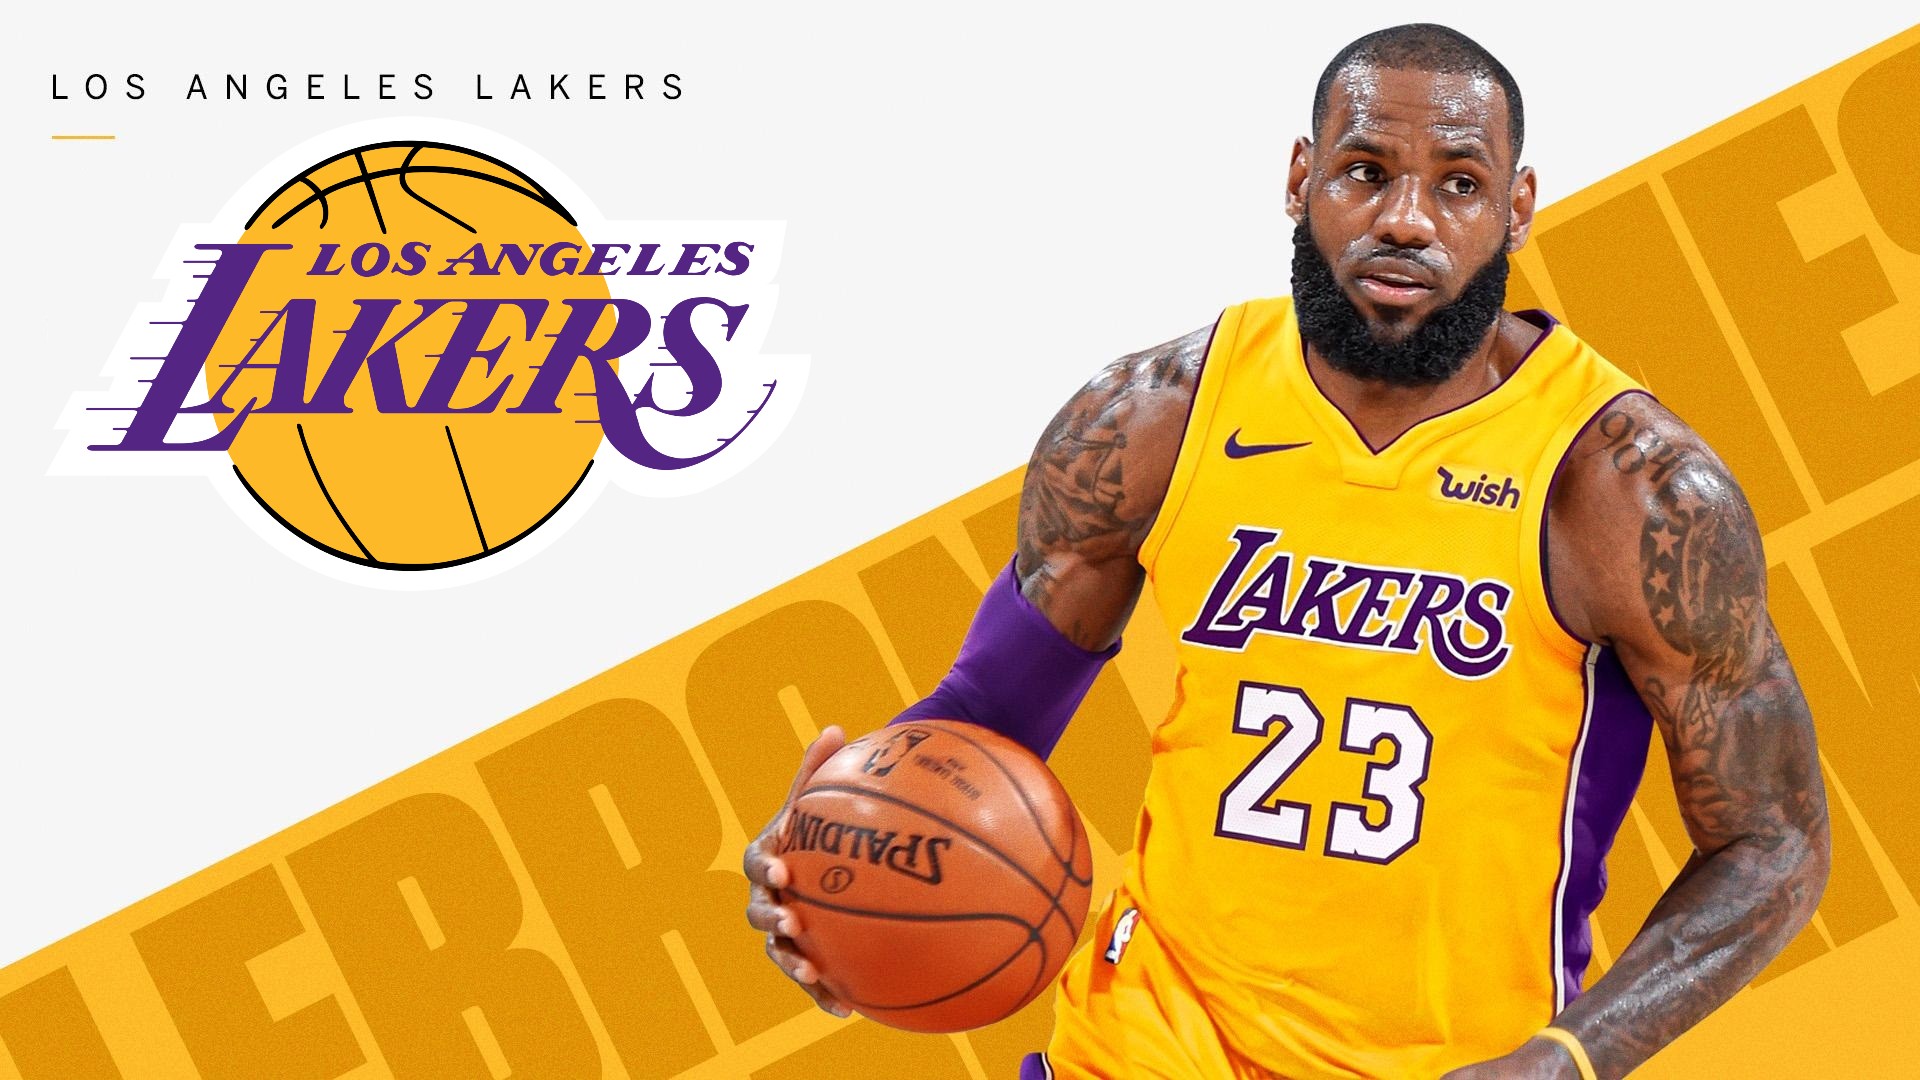 LeBron James Lakers Wallpaper HD with image dimensions 1920x1080 pixel. You can make this wallpaper for your Desktop Computer Backgrounds, Windows or Mac Screensavers, iPhone Lock screen, Tablet or Android and another Mobile Phone device